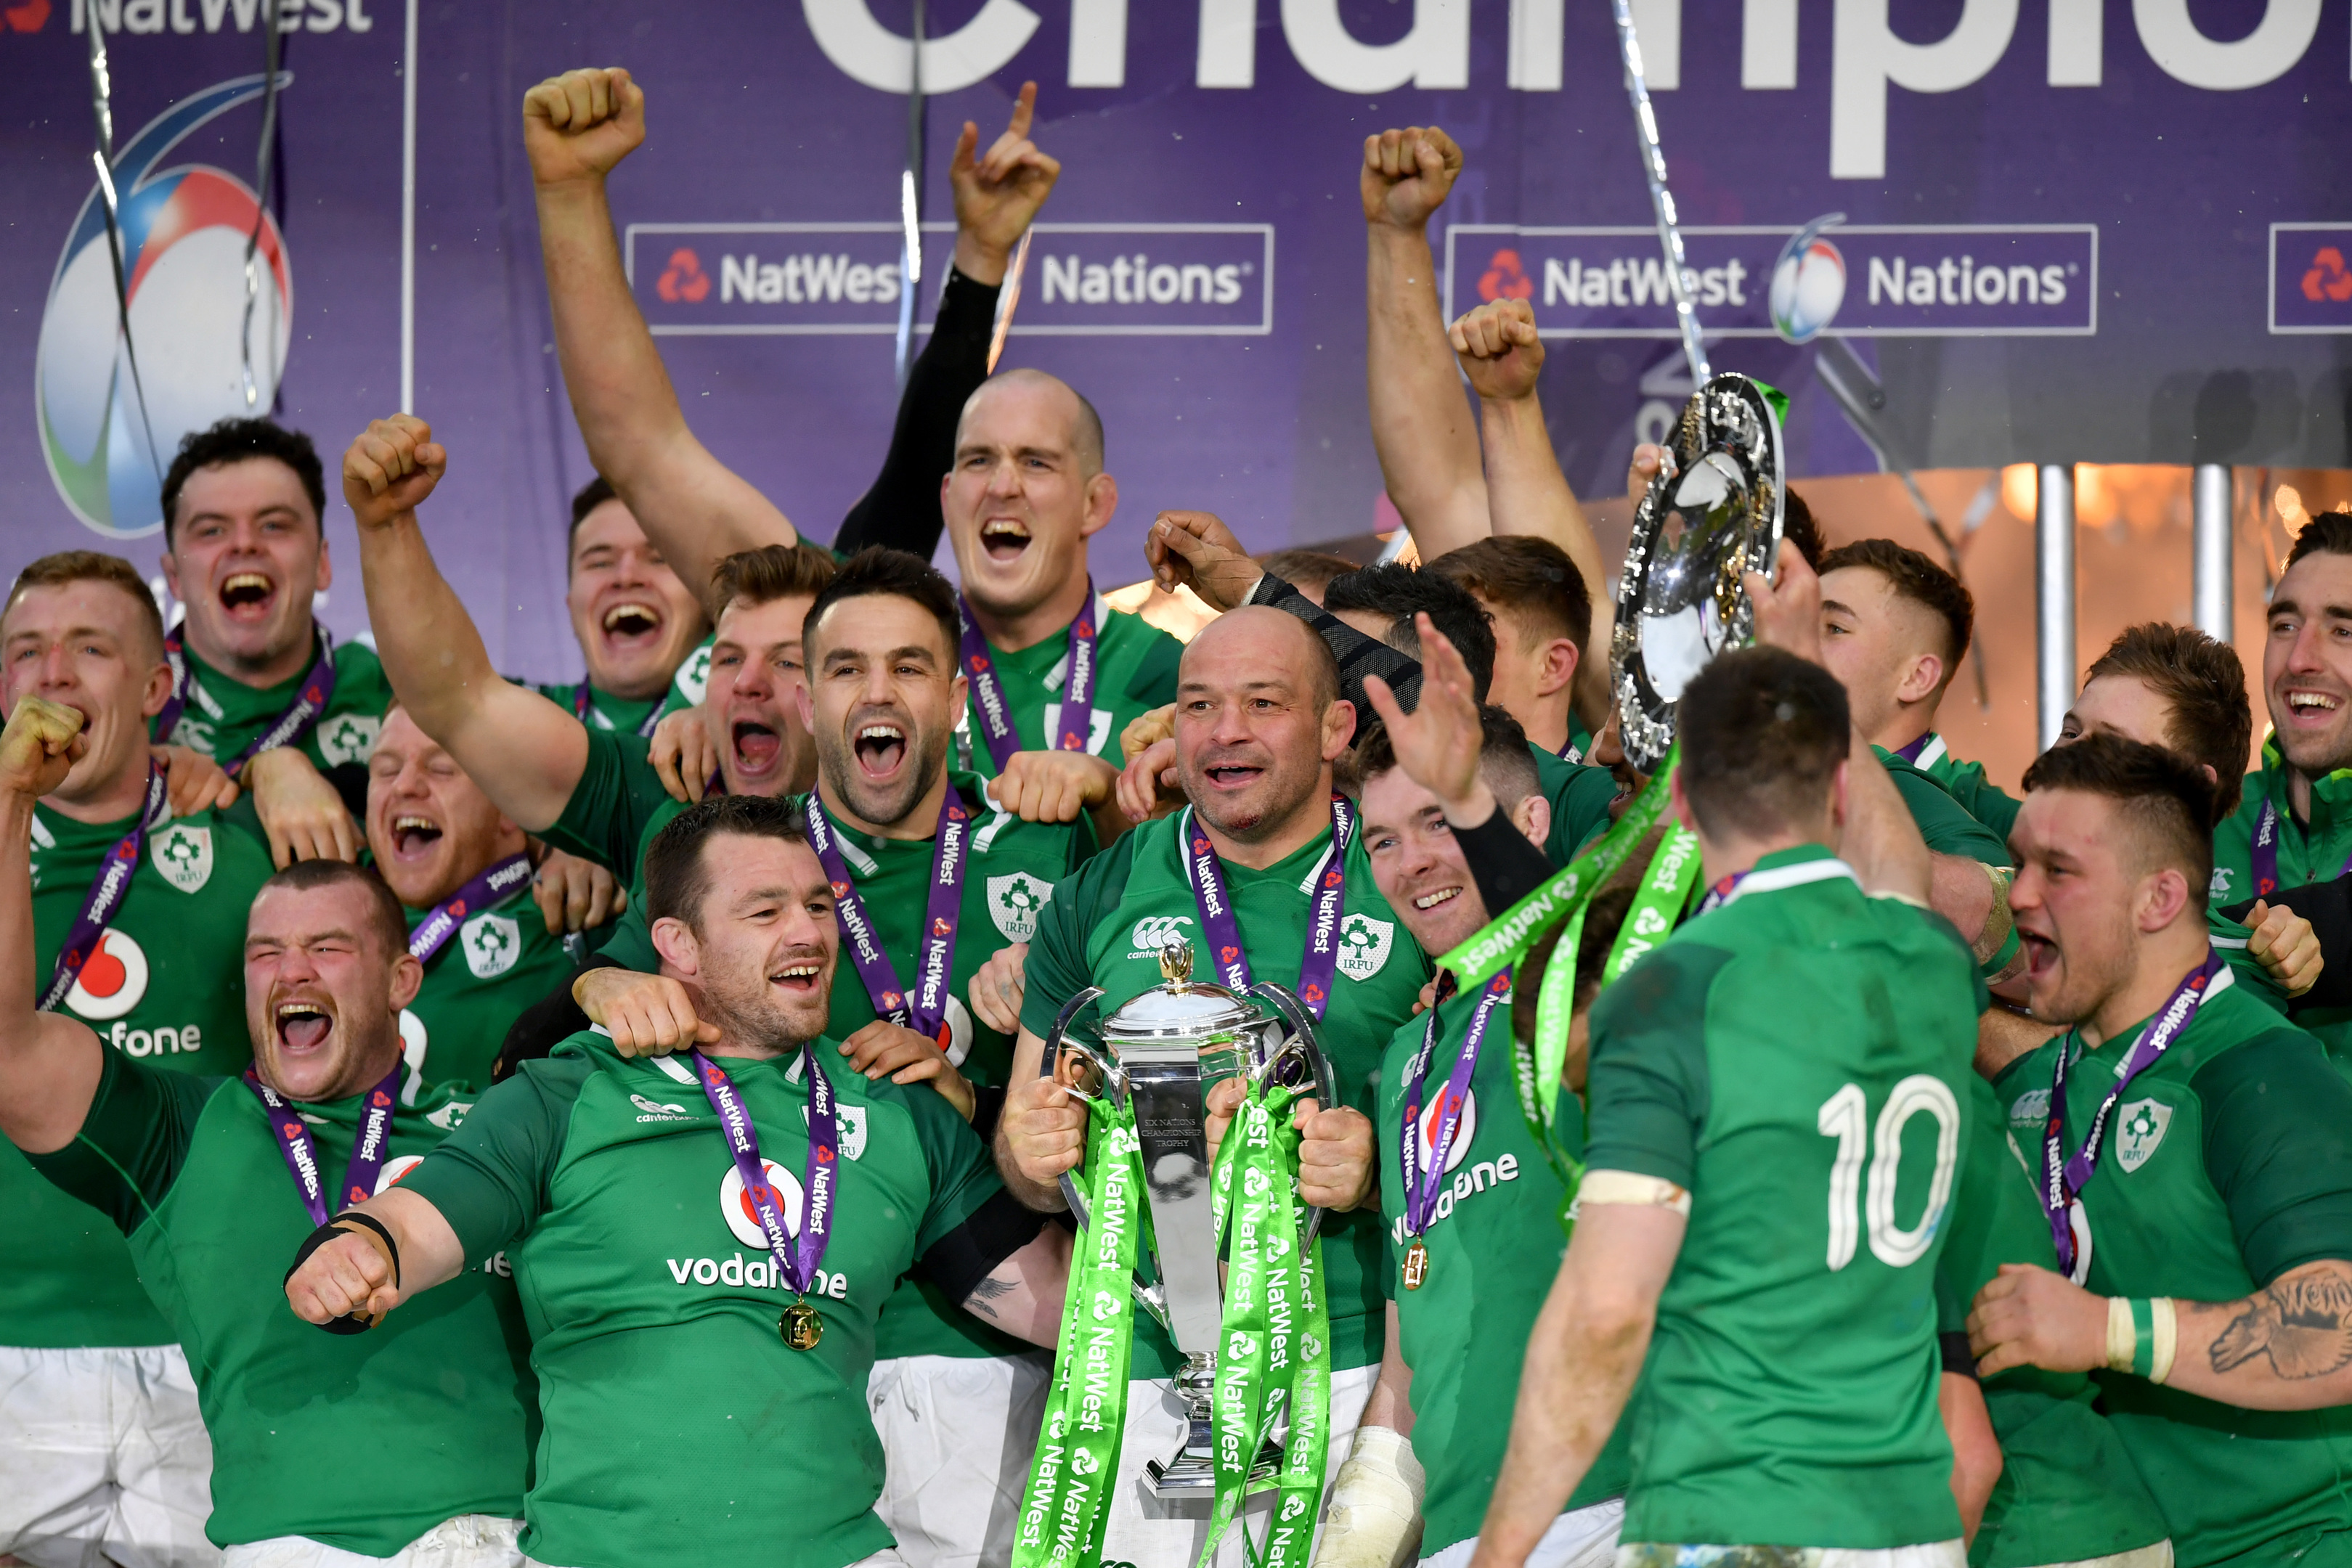 Rory Best of Ireland celebrates with The NatWest Six Nations trophy during the NatWest Six Nations match between England and Ireland at Twickenham Stadium on March 17, 2018 in London, England. (Dan Mullan/Getty Images)